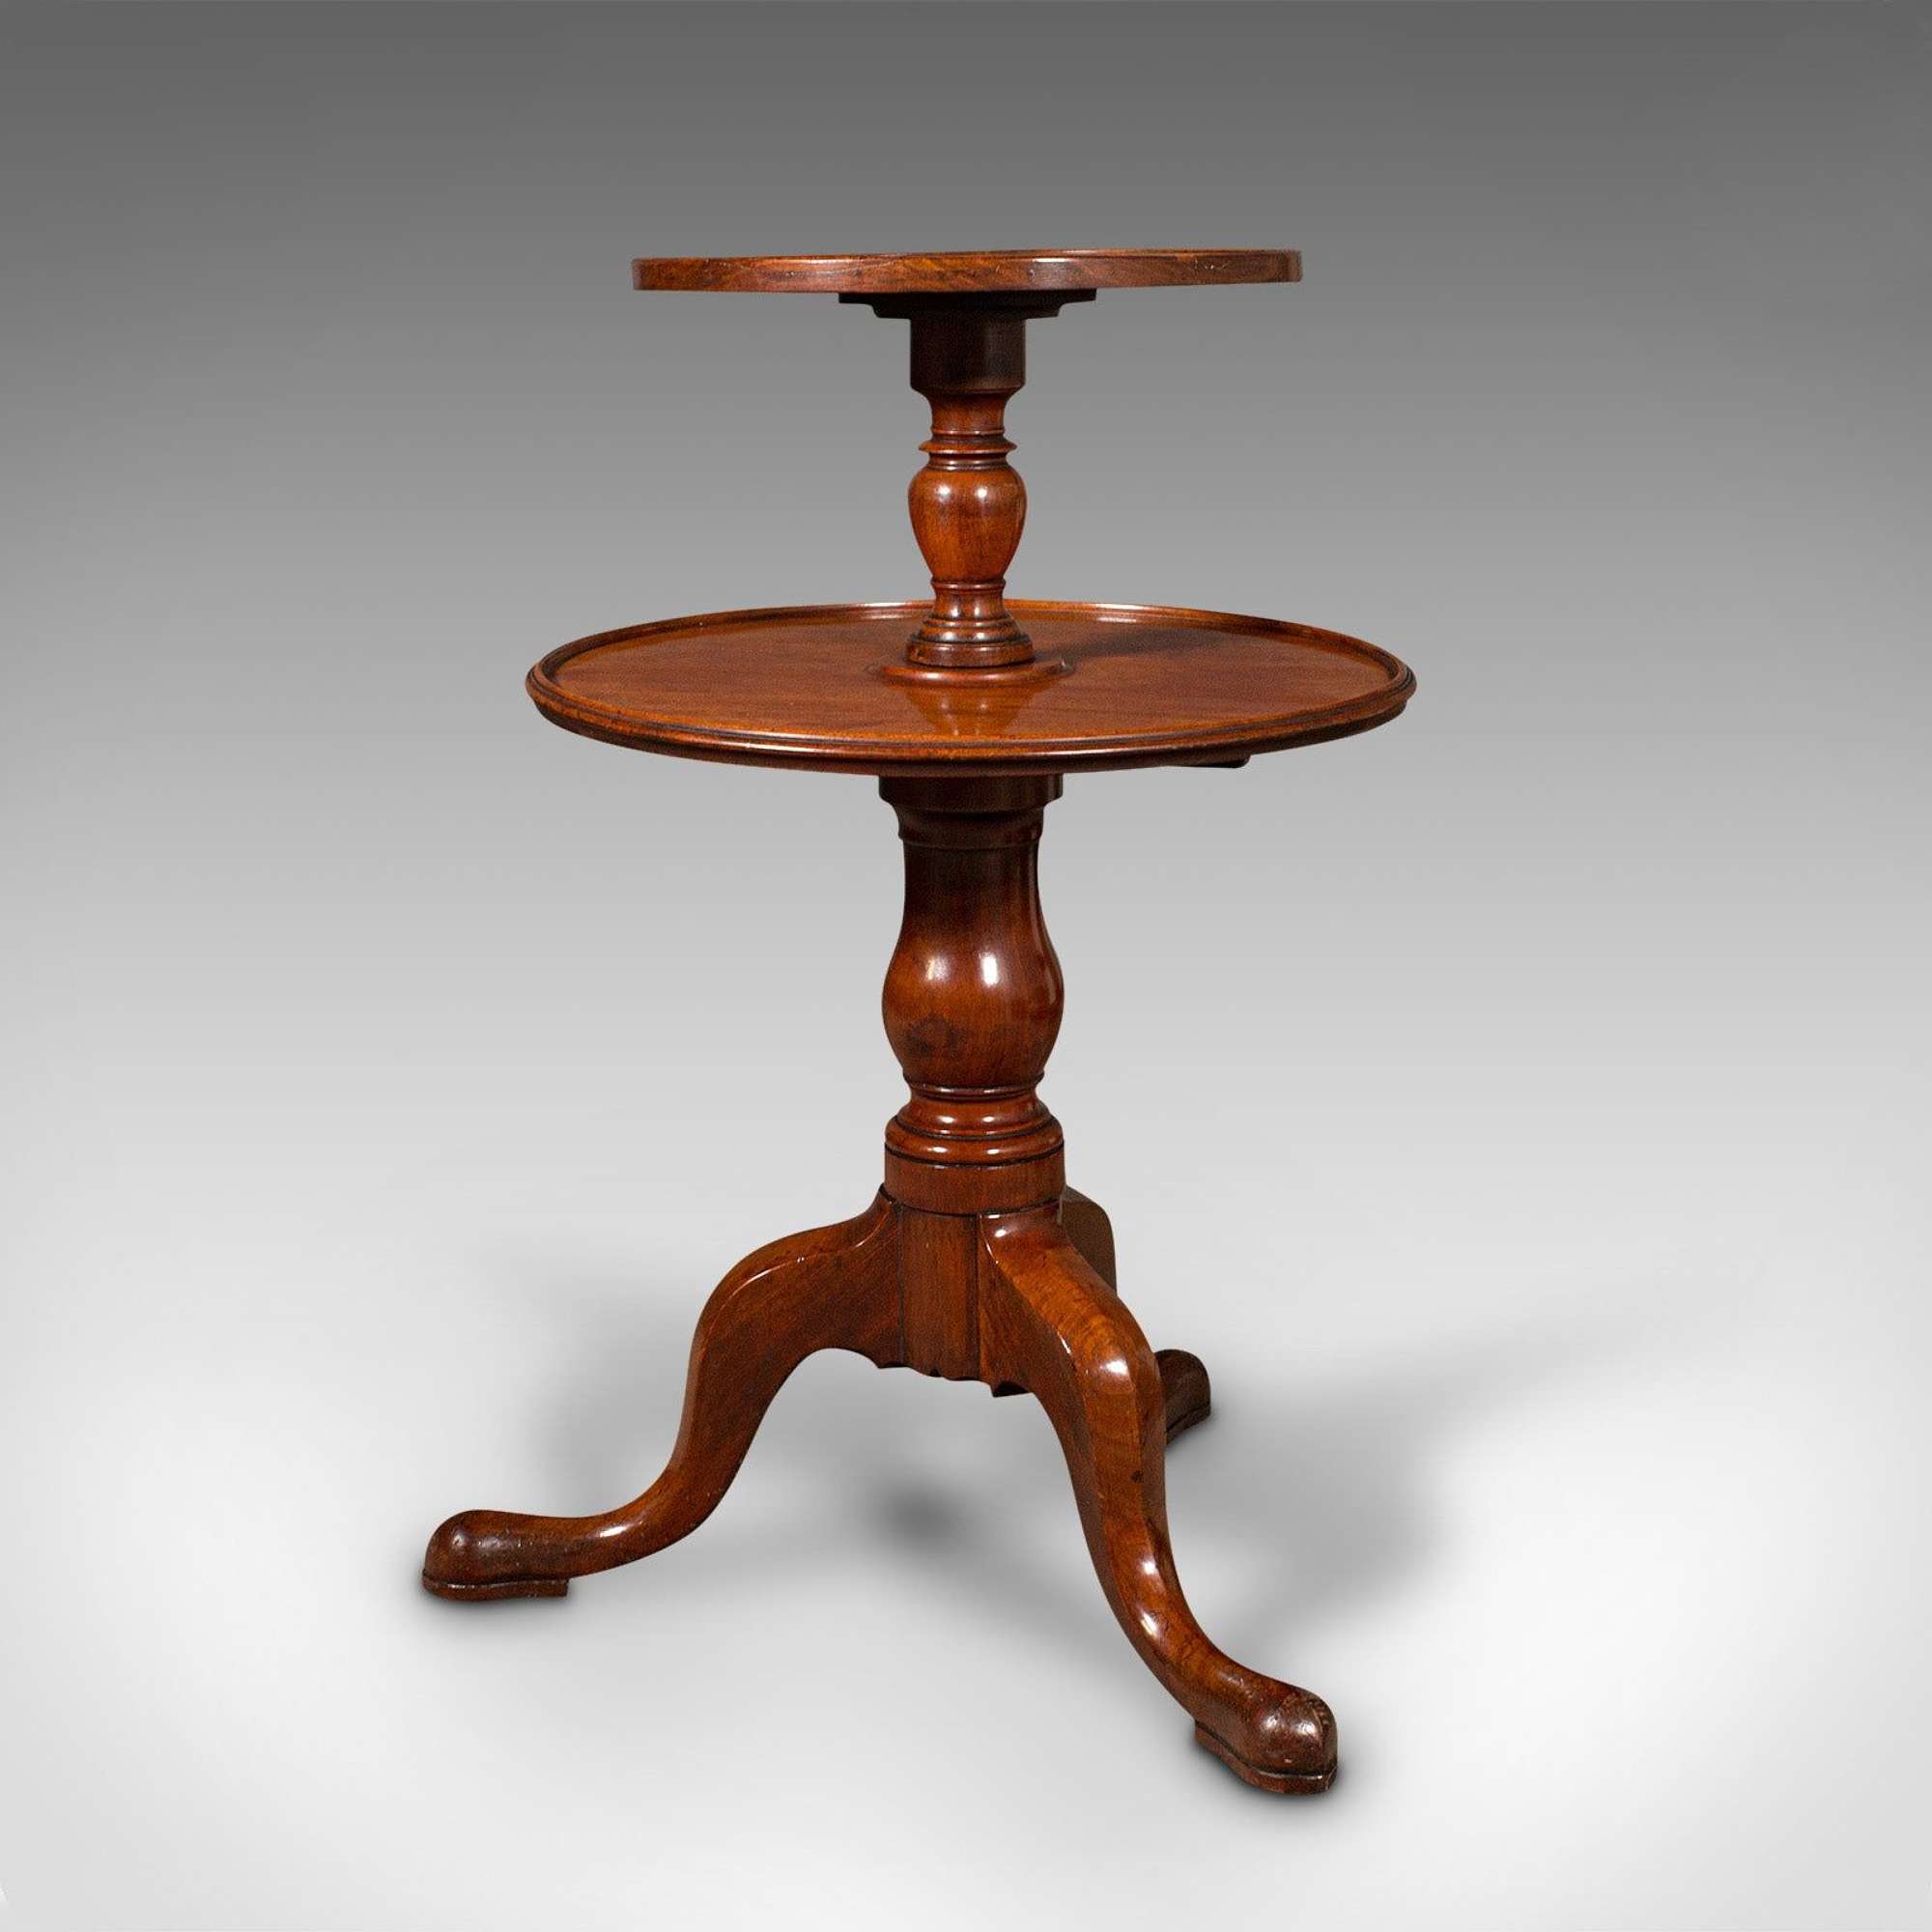 Antique Country House Dumb Waiter, English, 2-Tier Serving Table, Georgian, 1780